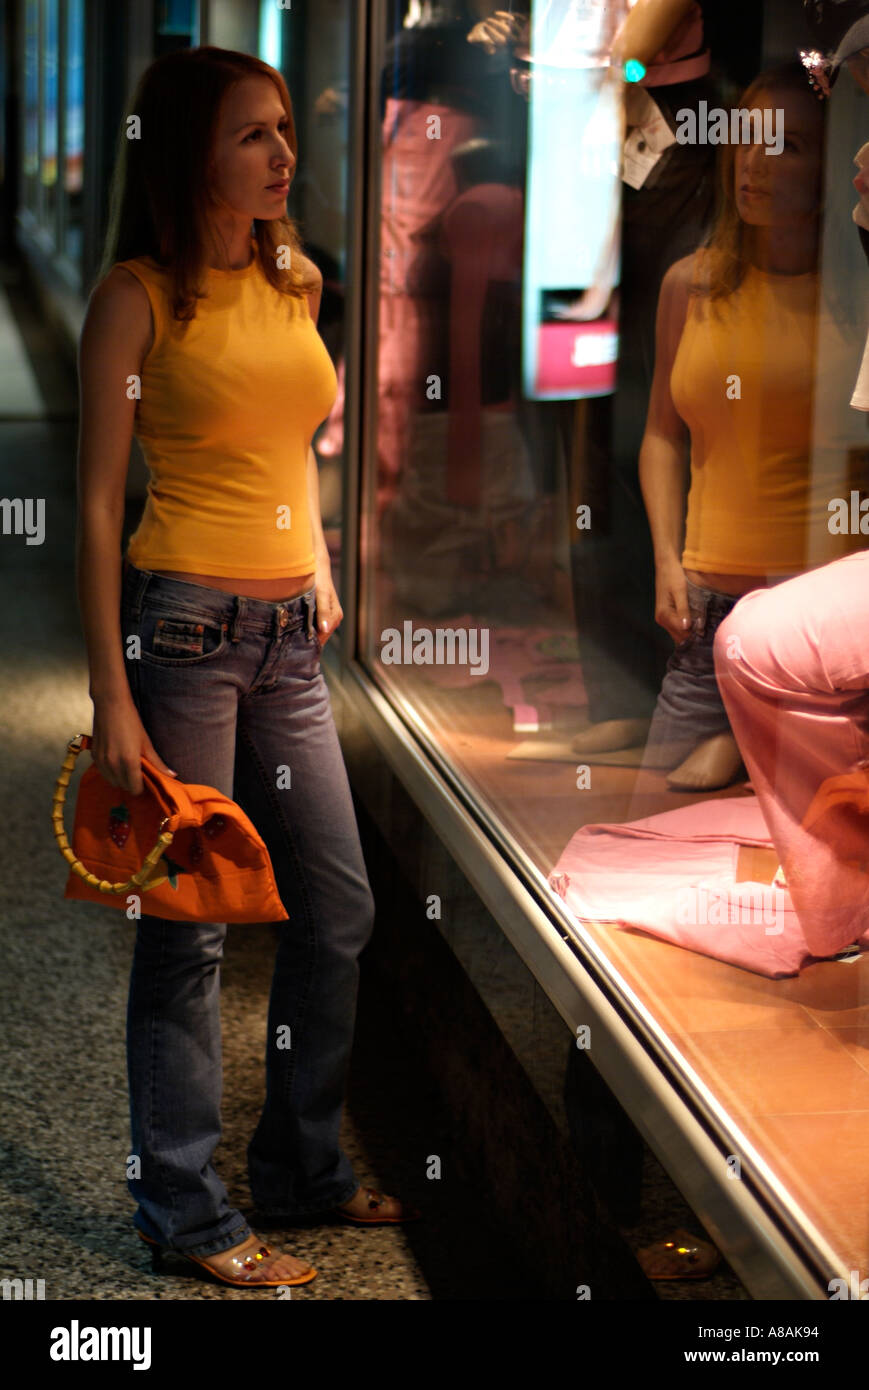 Young Woman Window Shopping During the Evening Stock Photo